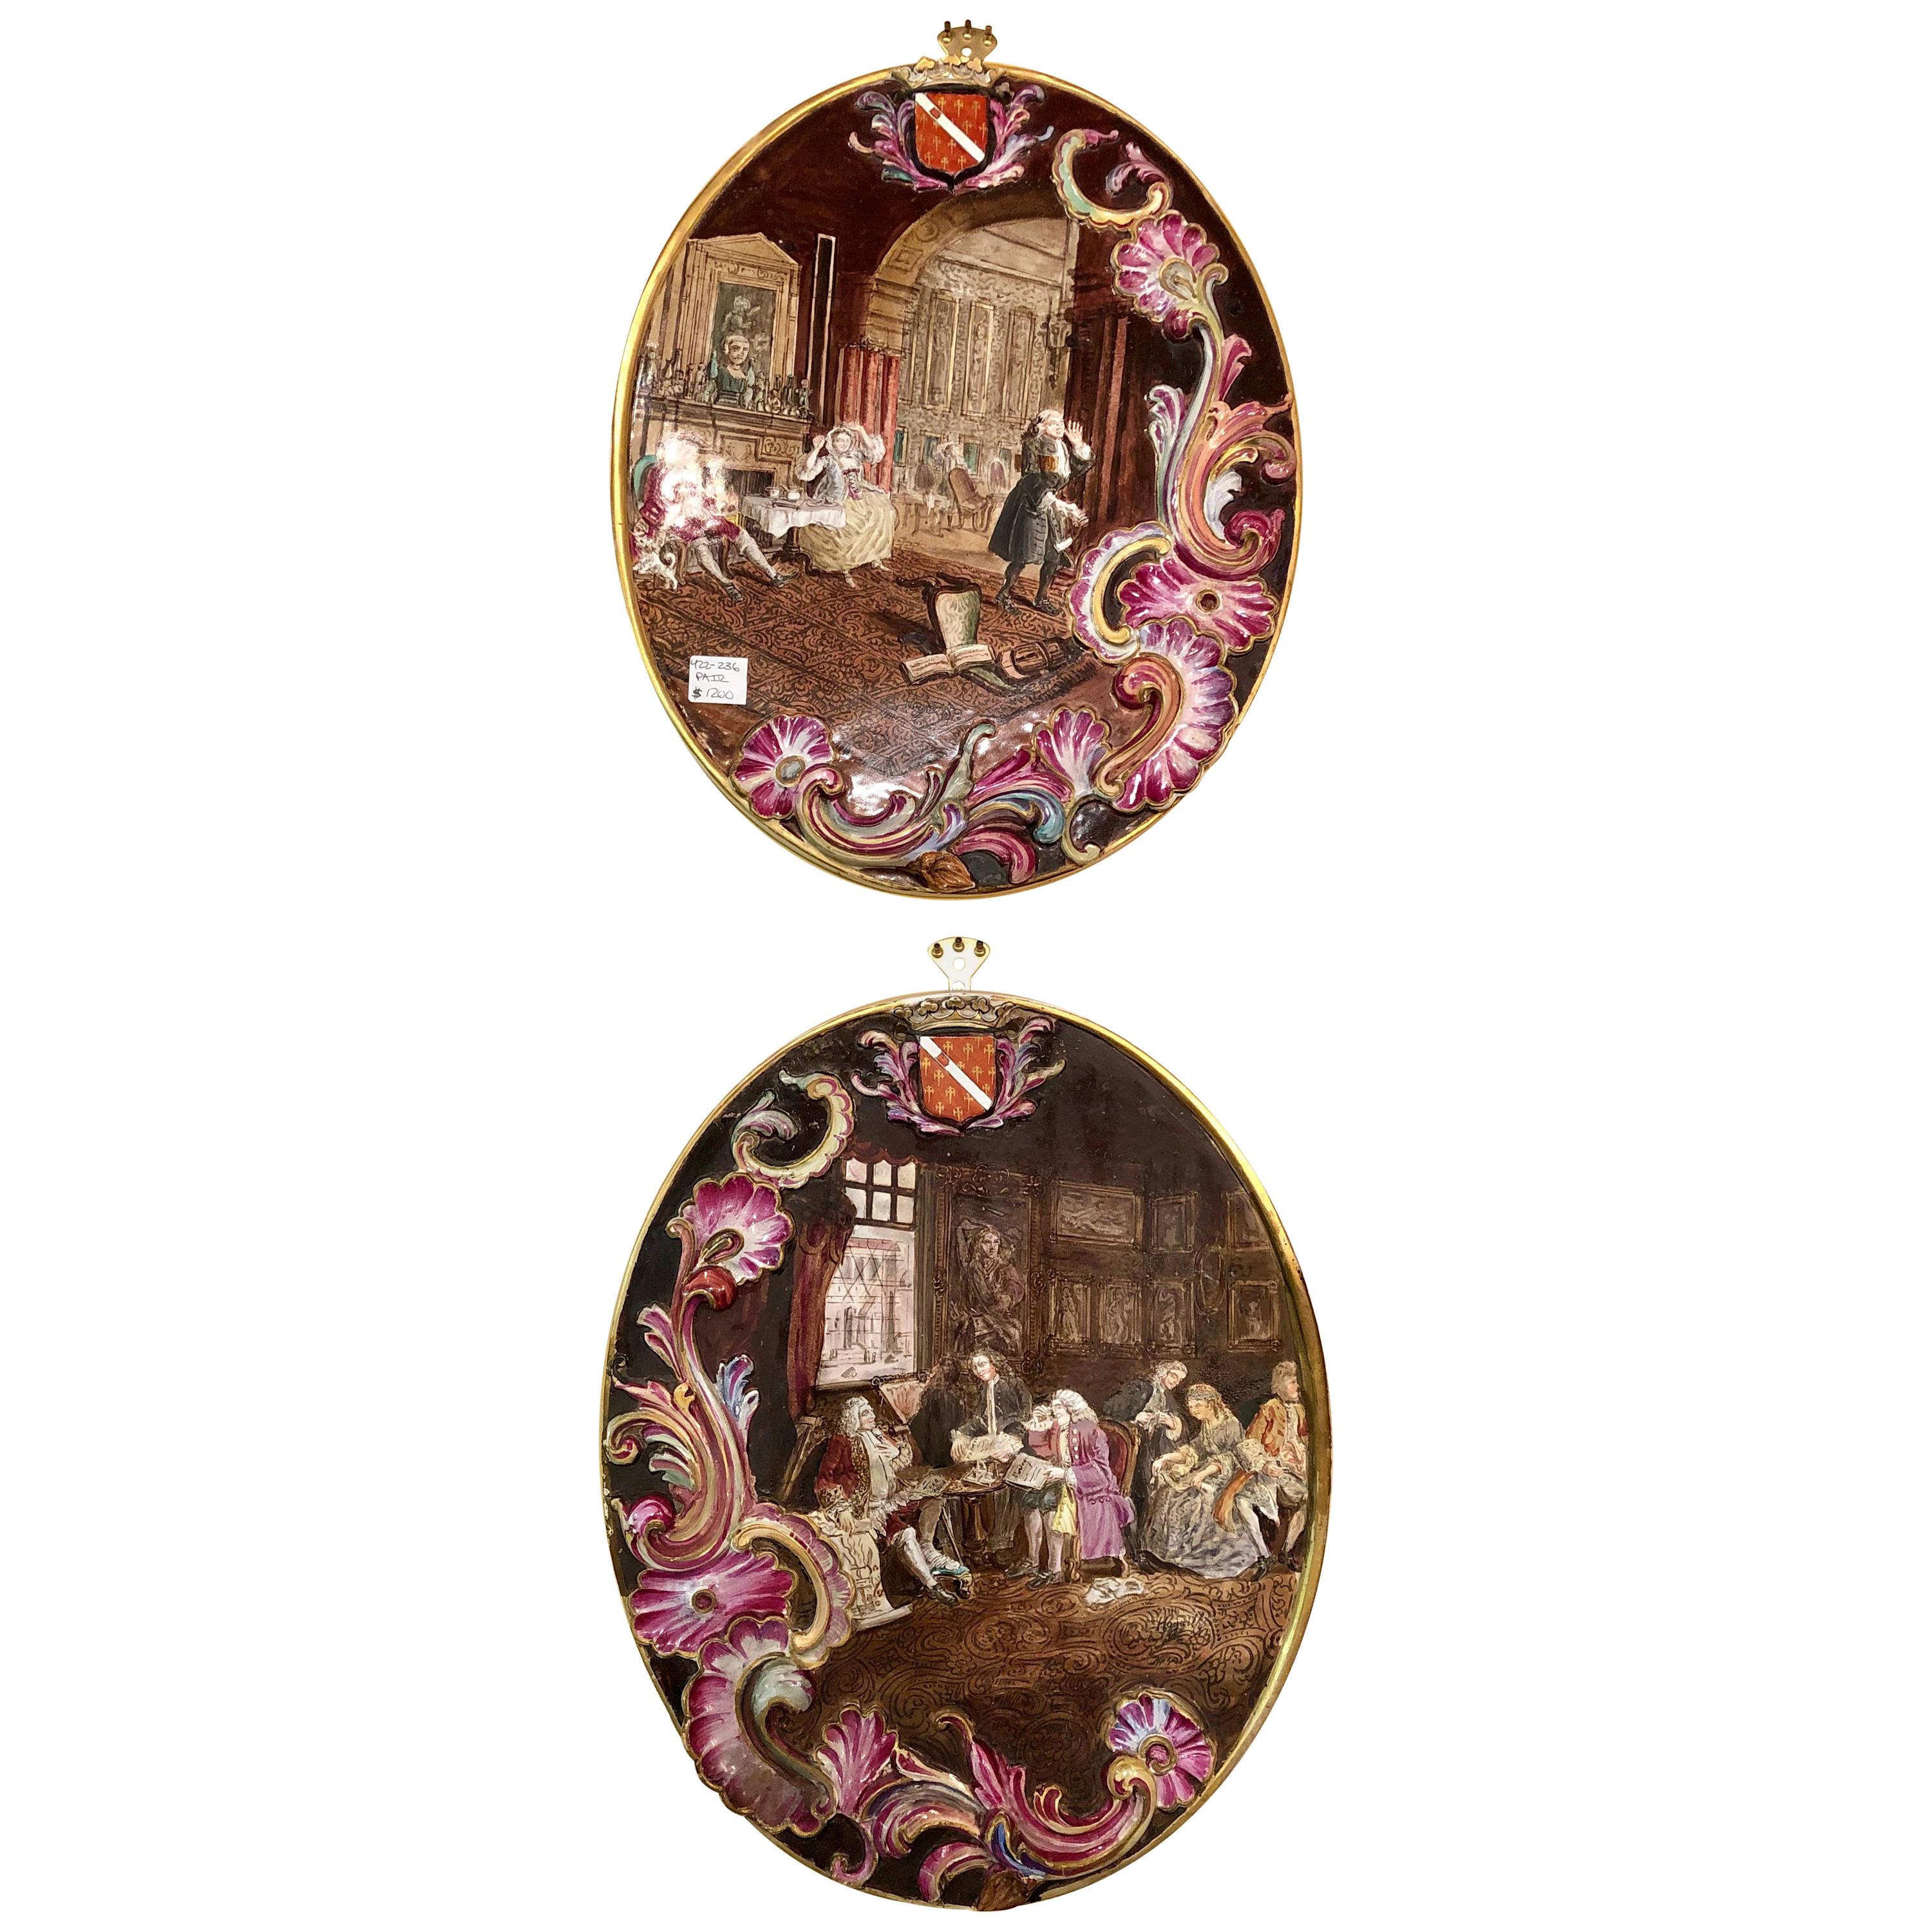 Neoclassical Genre Scene Painted 3 Dimensional Porcelain Signed Plaques, a Pair